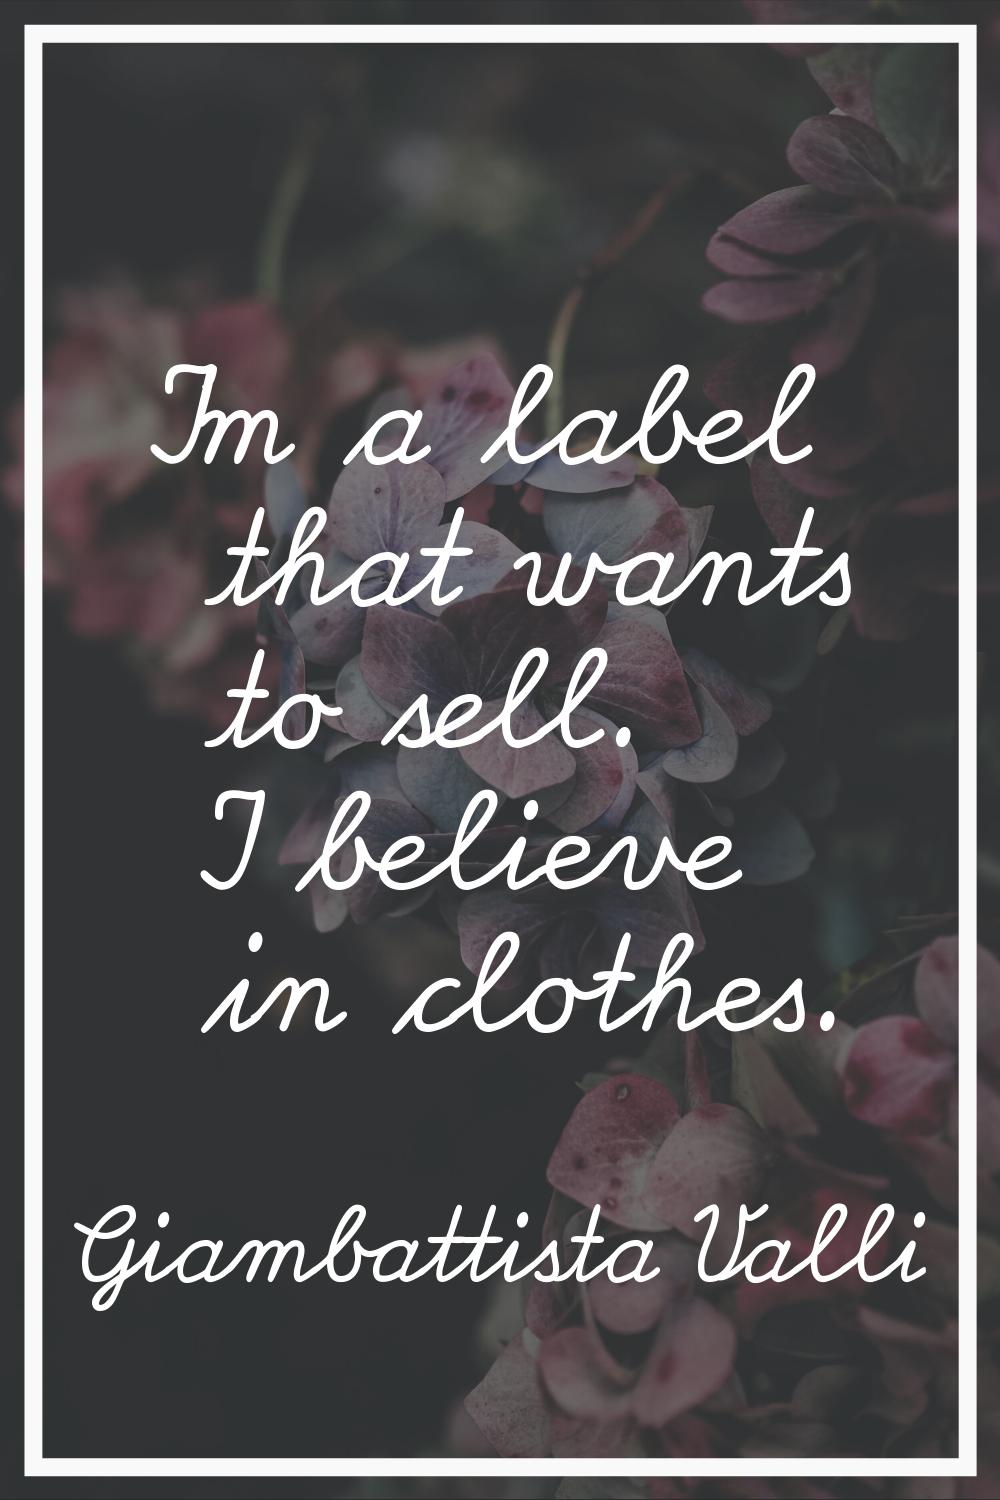 I'm a label that wants to sell. I believe in clothes.